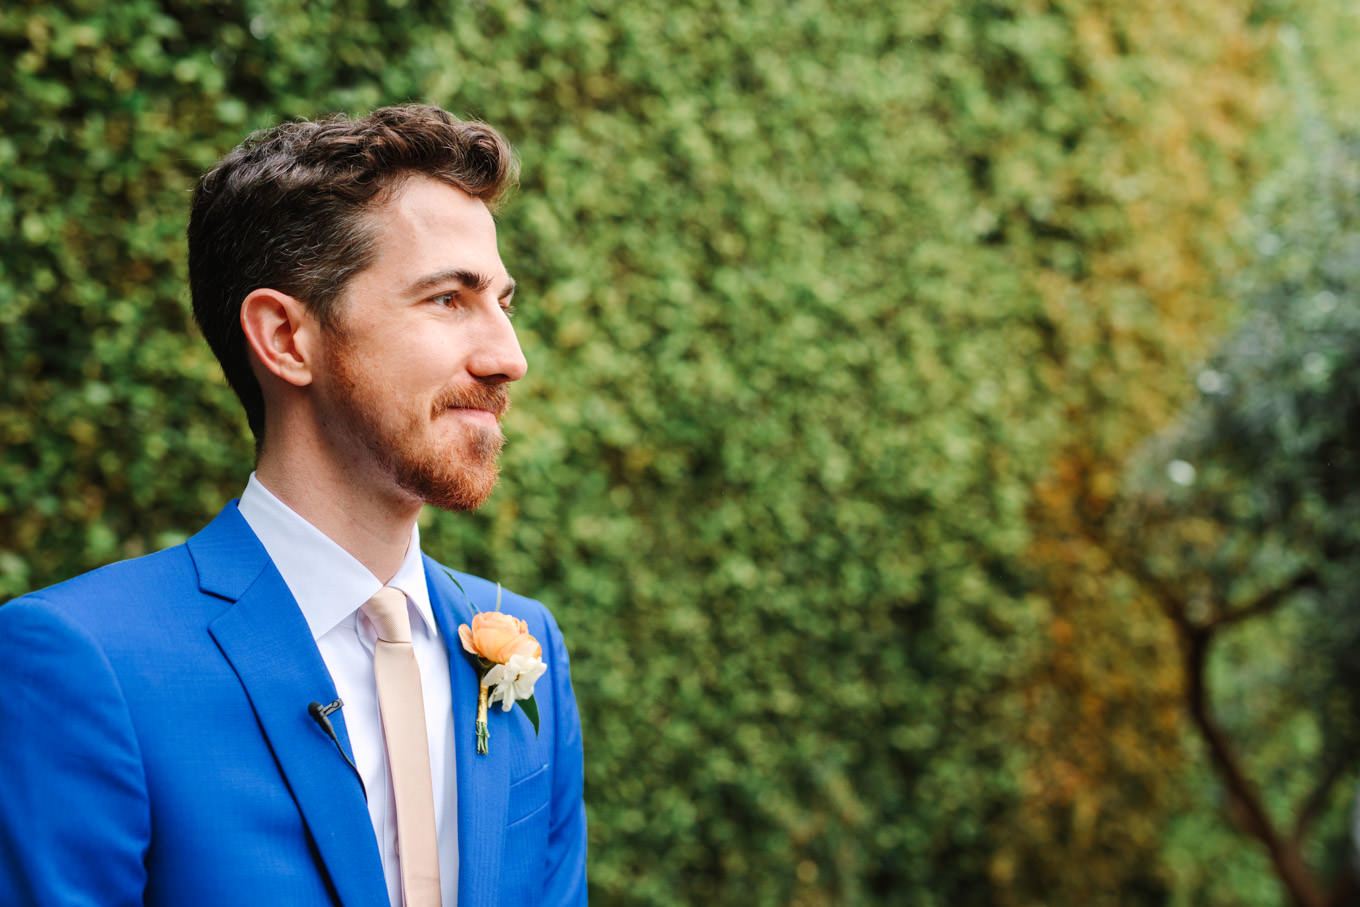 Groom at wedding ceremony | TV inspired wedding at The Fig House Los Angeles | Published on The Knot | Fresh and colorful photography for fun-loving couples in Southern California | #losangeleswedding #TVwedding #colorfulwedding #theknot   Source: Mary Costa Photography | Los Angeles wedding photographer